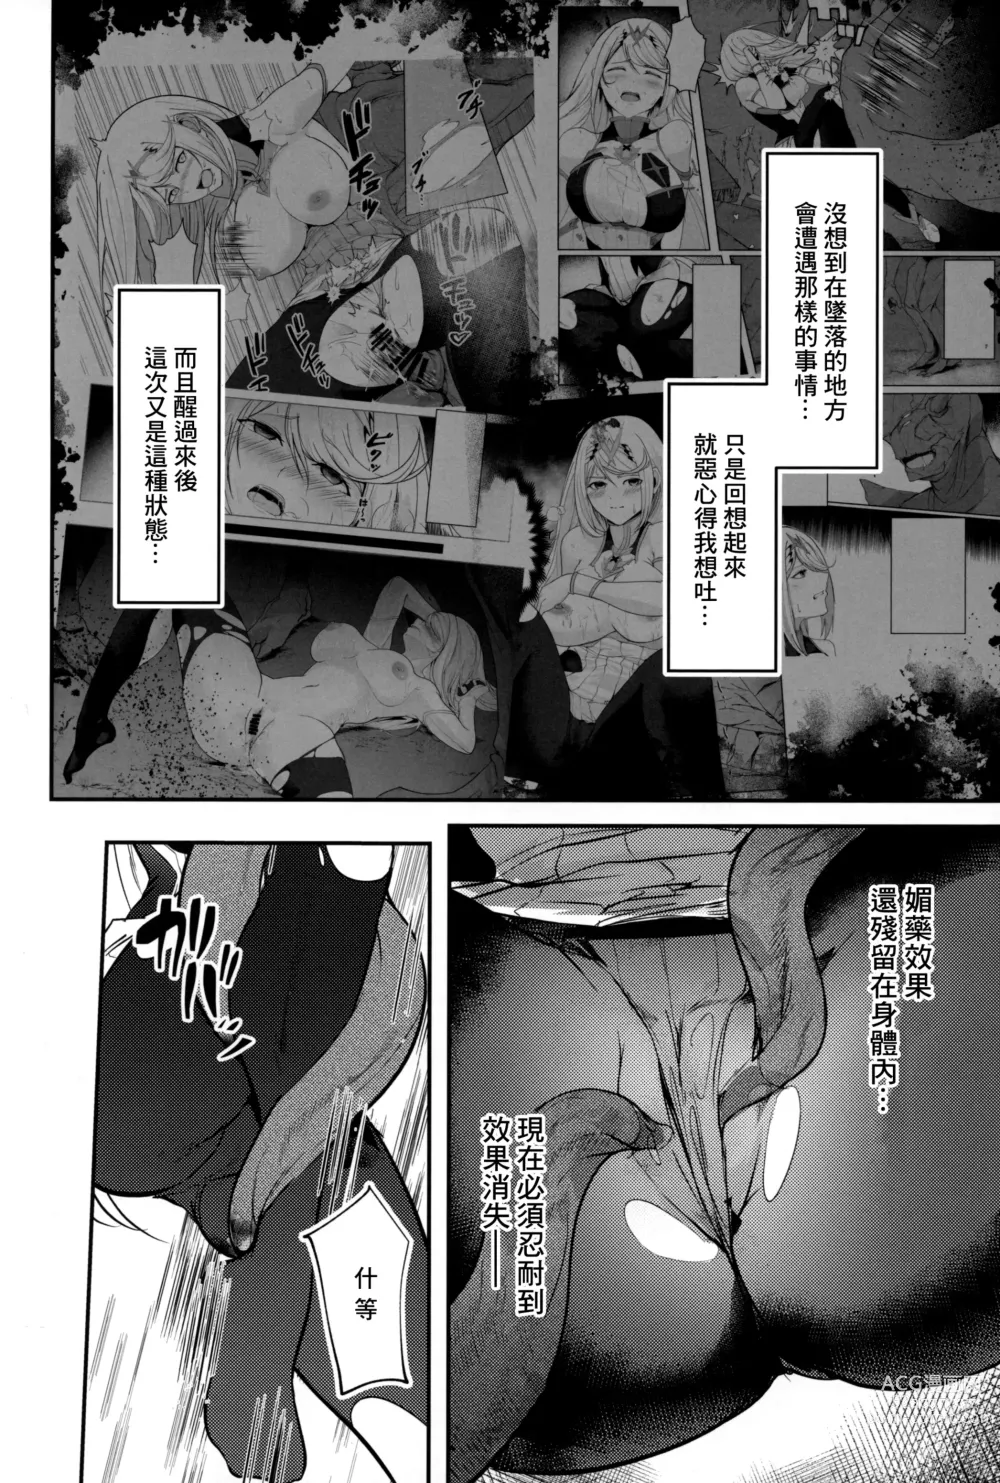 Page 5 of doujinshi Falling into The End